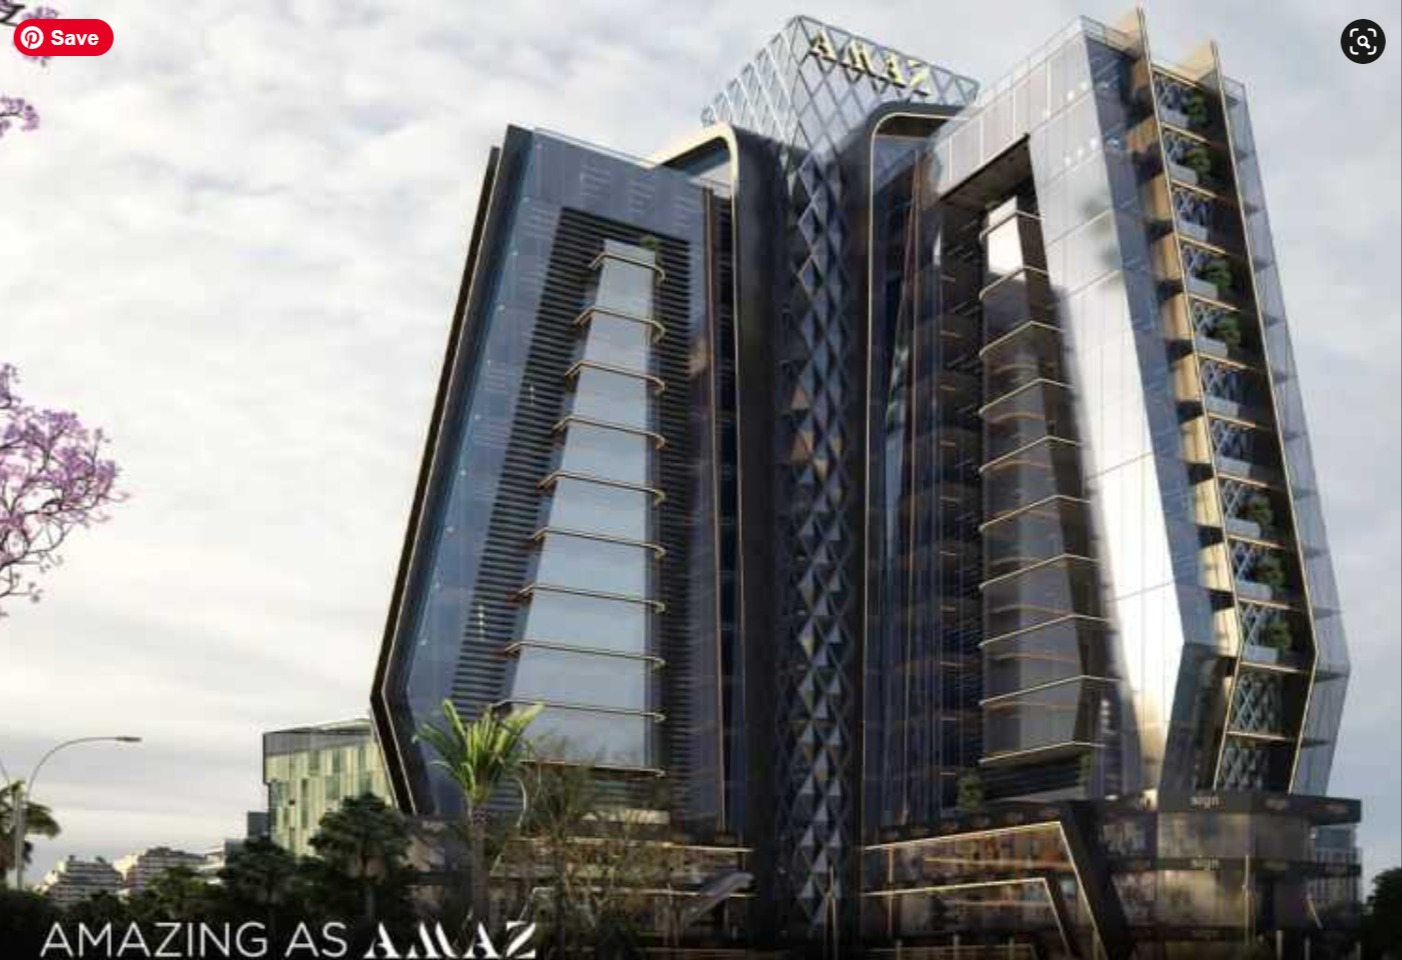 Administrative units for sale in Amaz Business Complex Mall